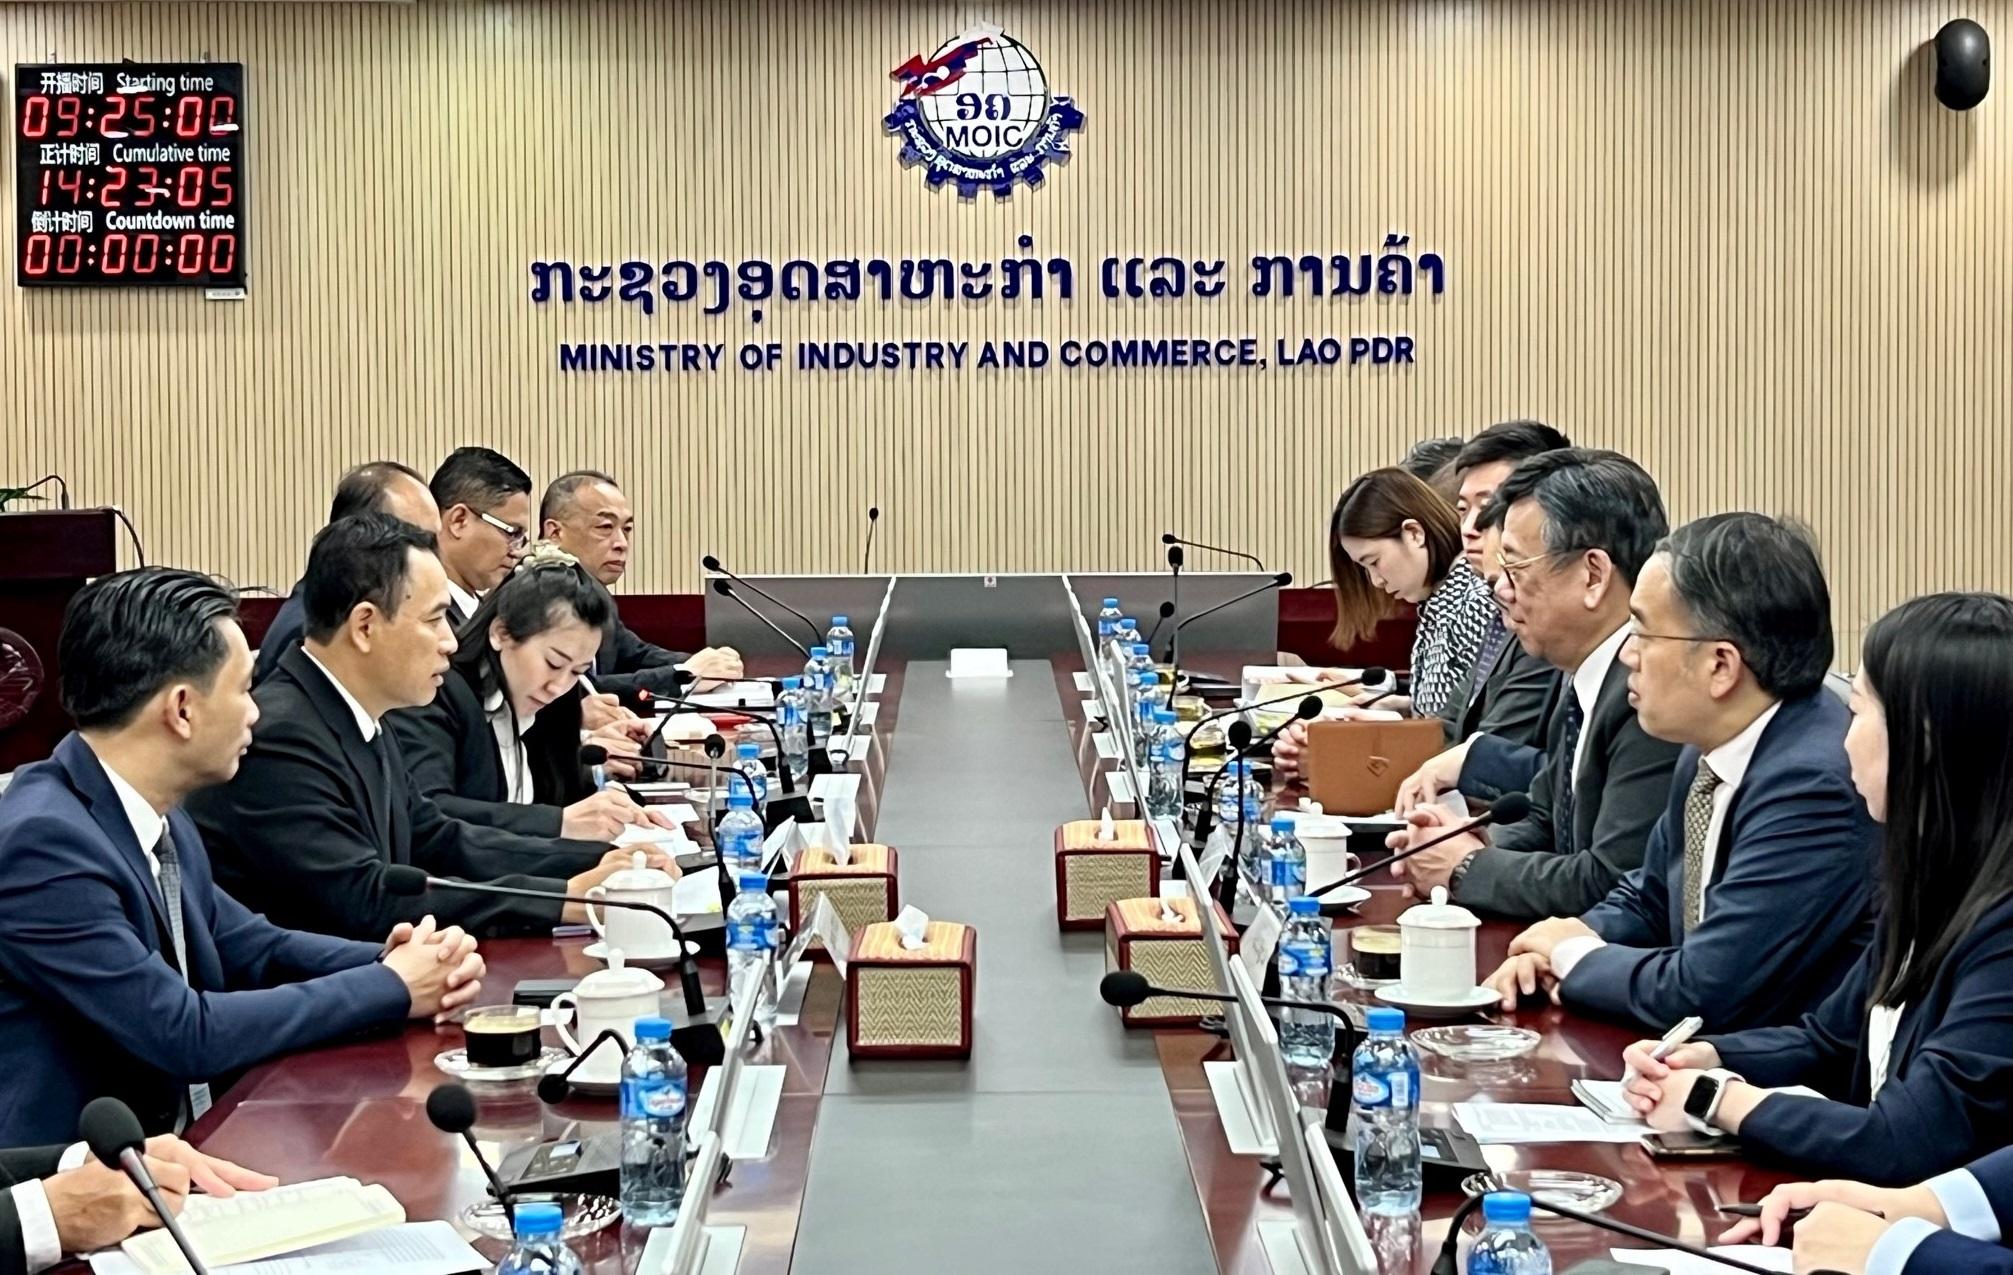 The Secretary for Financial Services and the Treasury, Mr Christopher Hui (second right), and the Secretary for Commerce and Economic Development, Mr Algernon Yau (third right), meet with the Minister of Industry and Commerce of Laos, Mr Malaithong Kommasith (second left), in Vientiane, Laos today (December 11) to discuss issues of mutual concern and explore opportunities of co-operation.